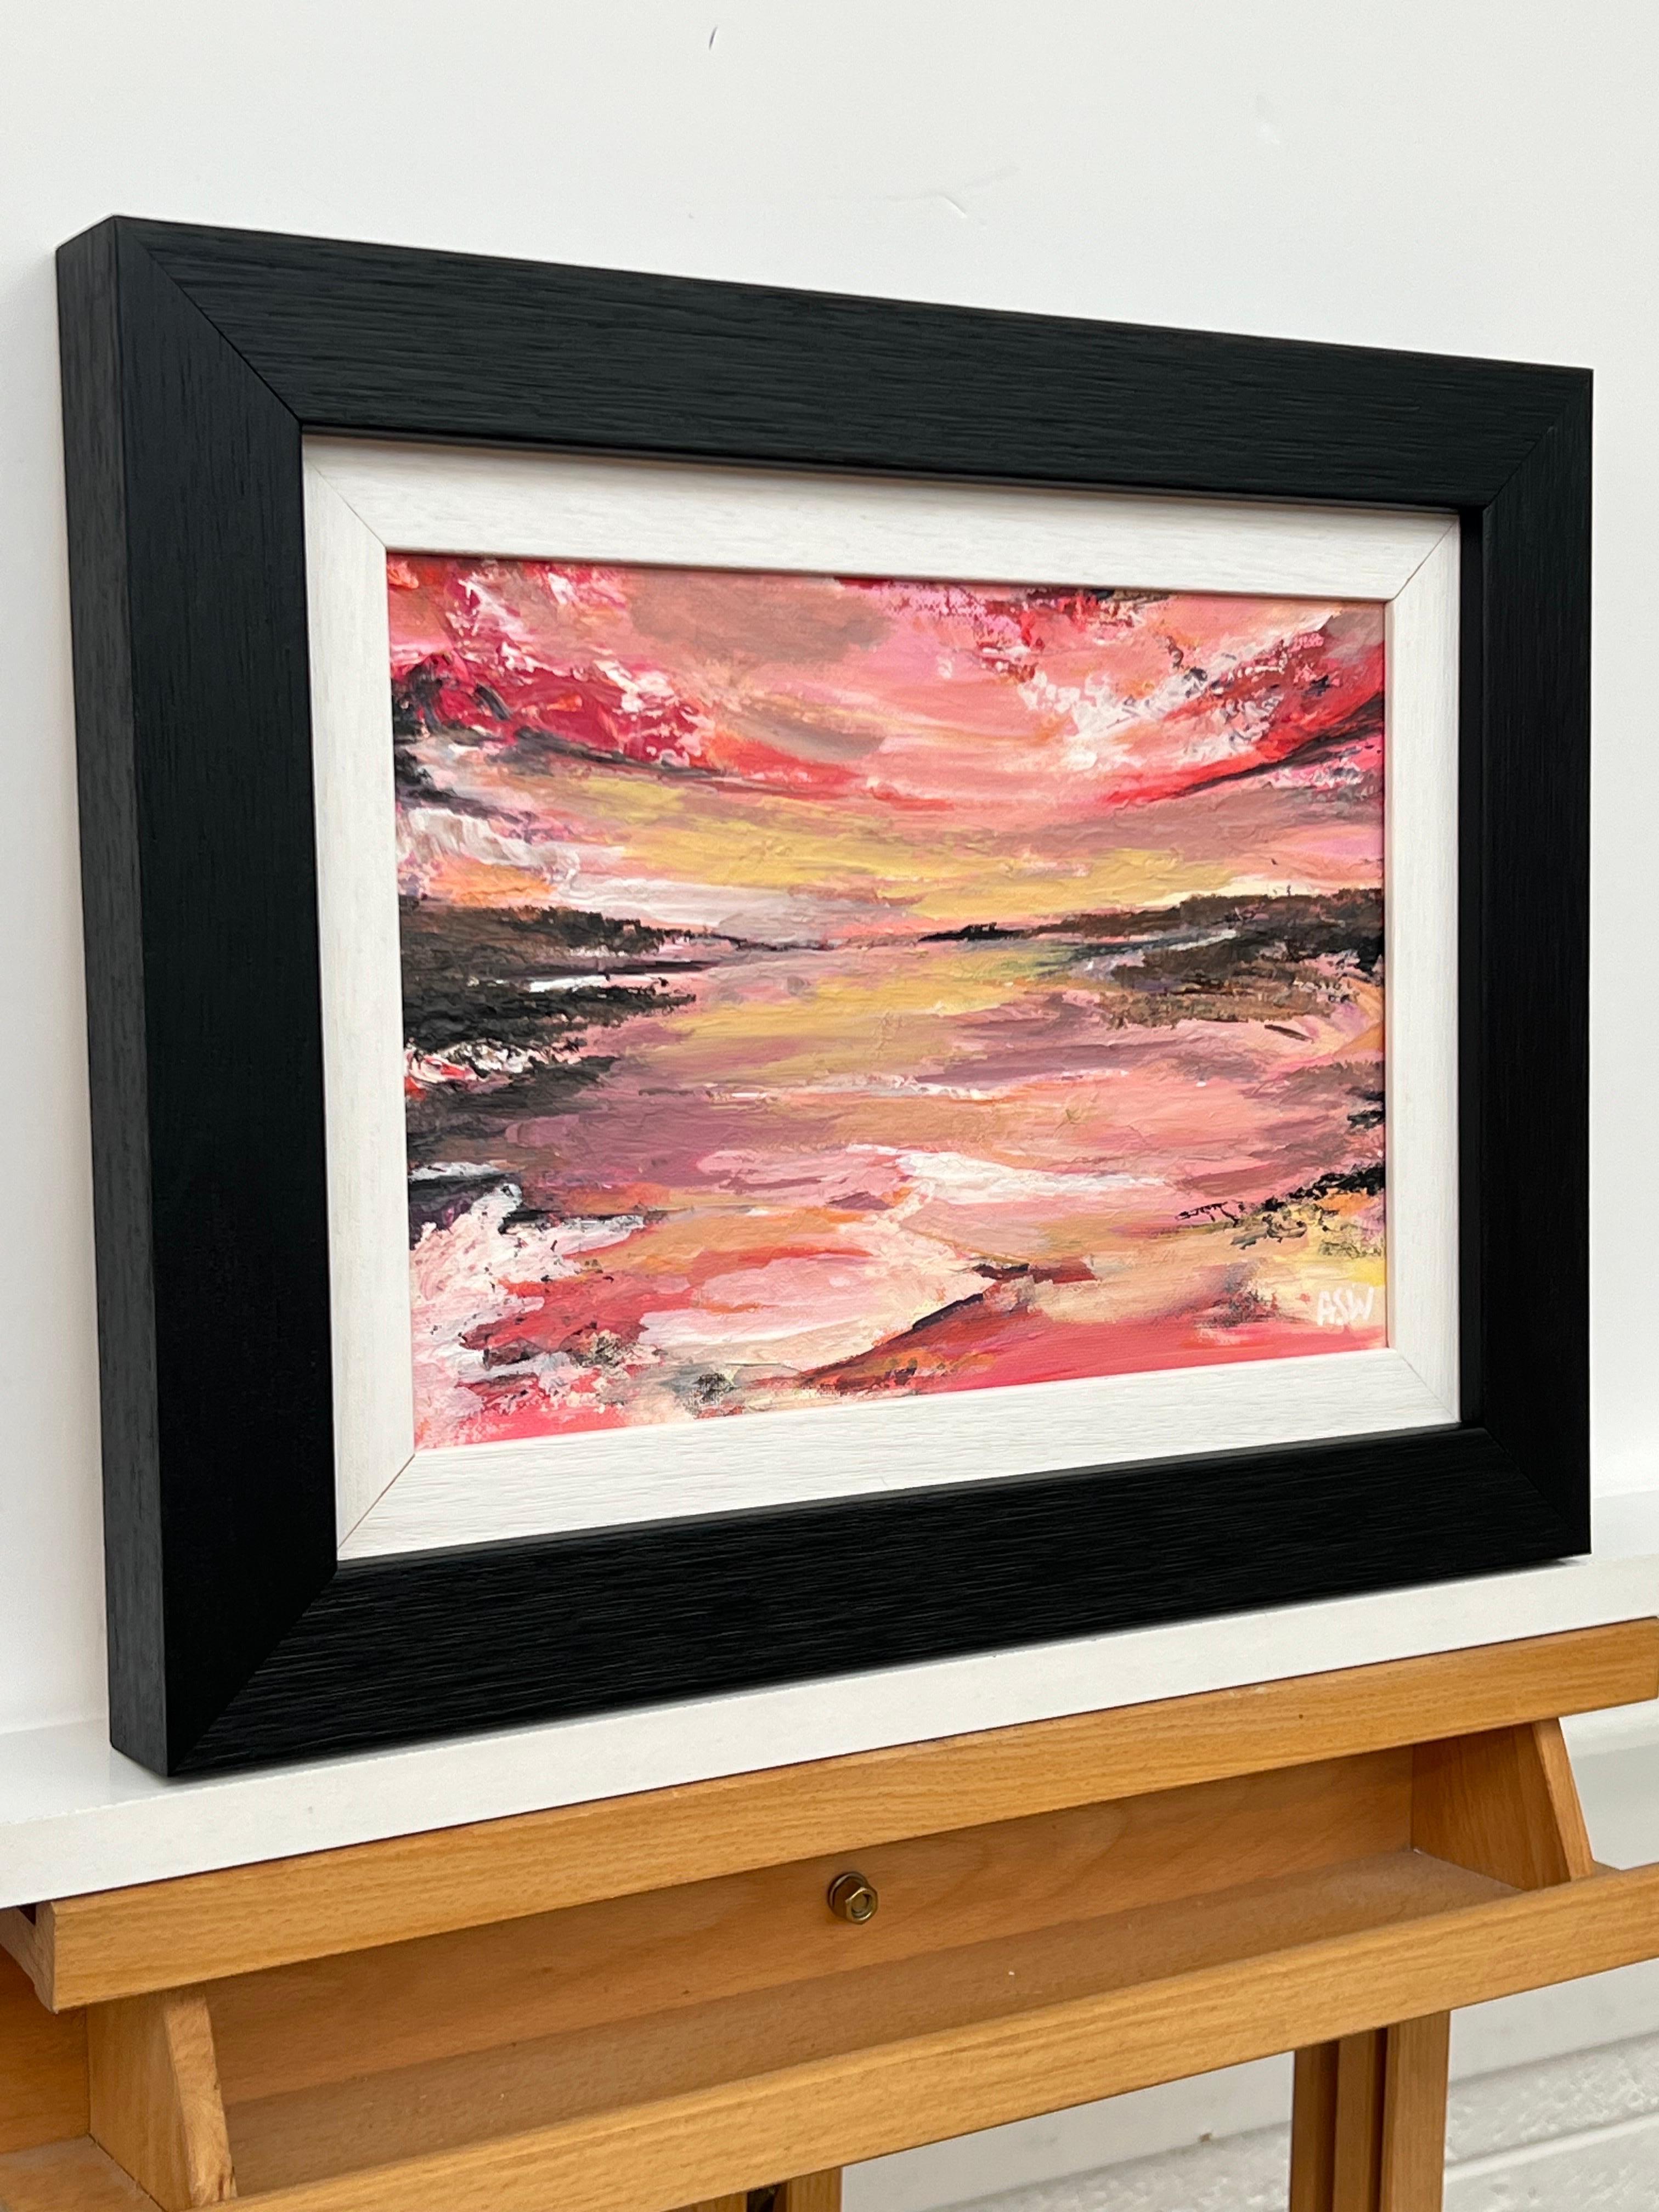 Impasto Abstract Landscape Seascape Painting with Pink Red Black & Golden Yellow by British Contemporary Artist, Angela Wakefield 

Art measures 12 x 8 inches 
Frame measures 17 x 13 inches 

Angela Wakefield has twice been on the front cover of